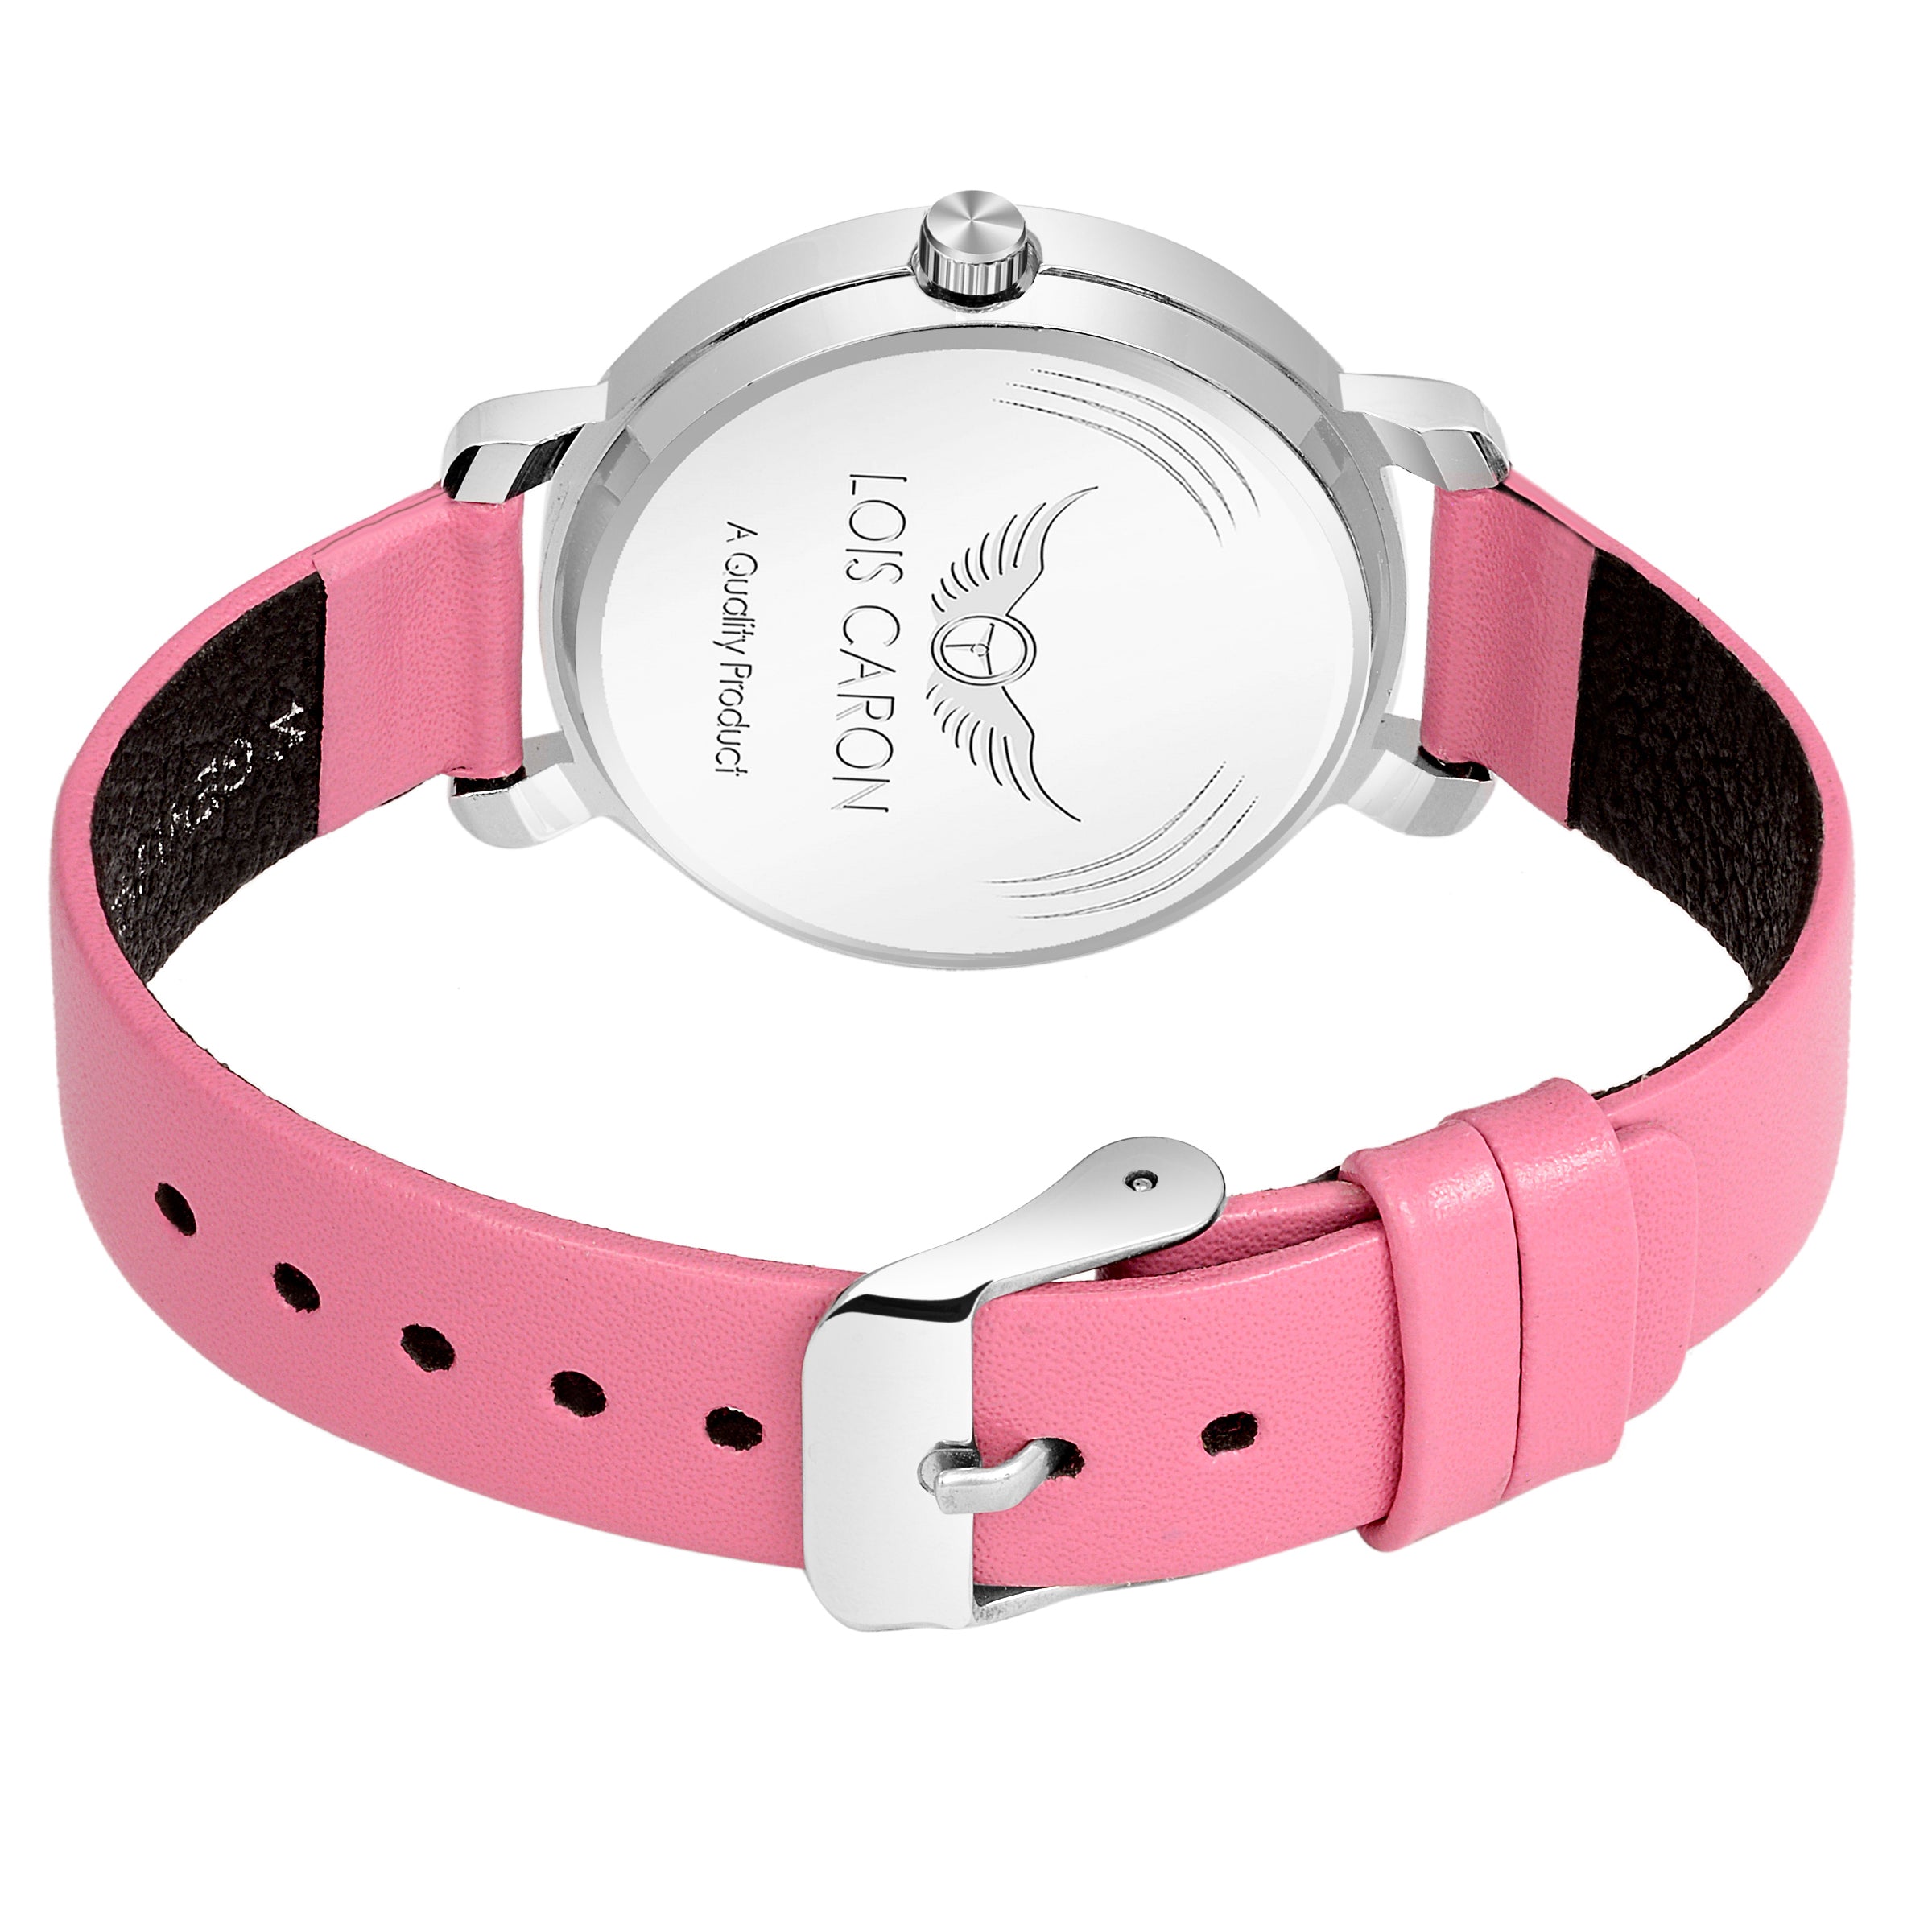 WHITE DIAL & PINK LEATHER STRAP FOR GIRLS Analog Watch - For Girls LCS-4694